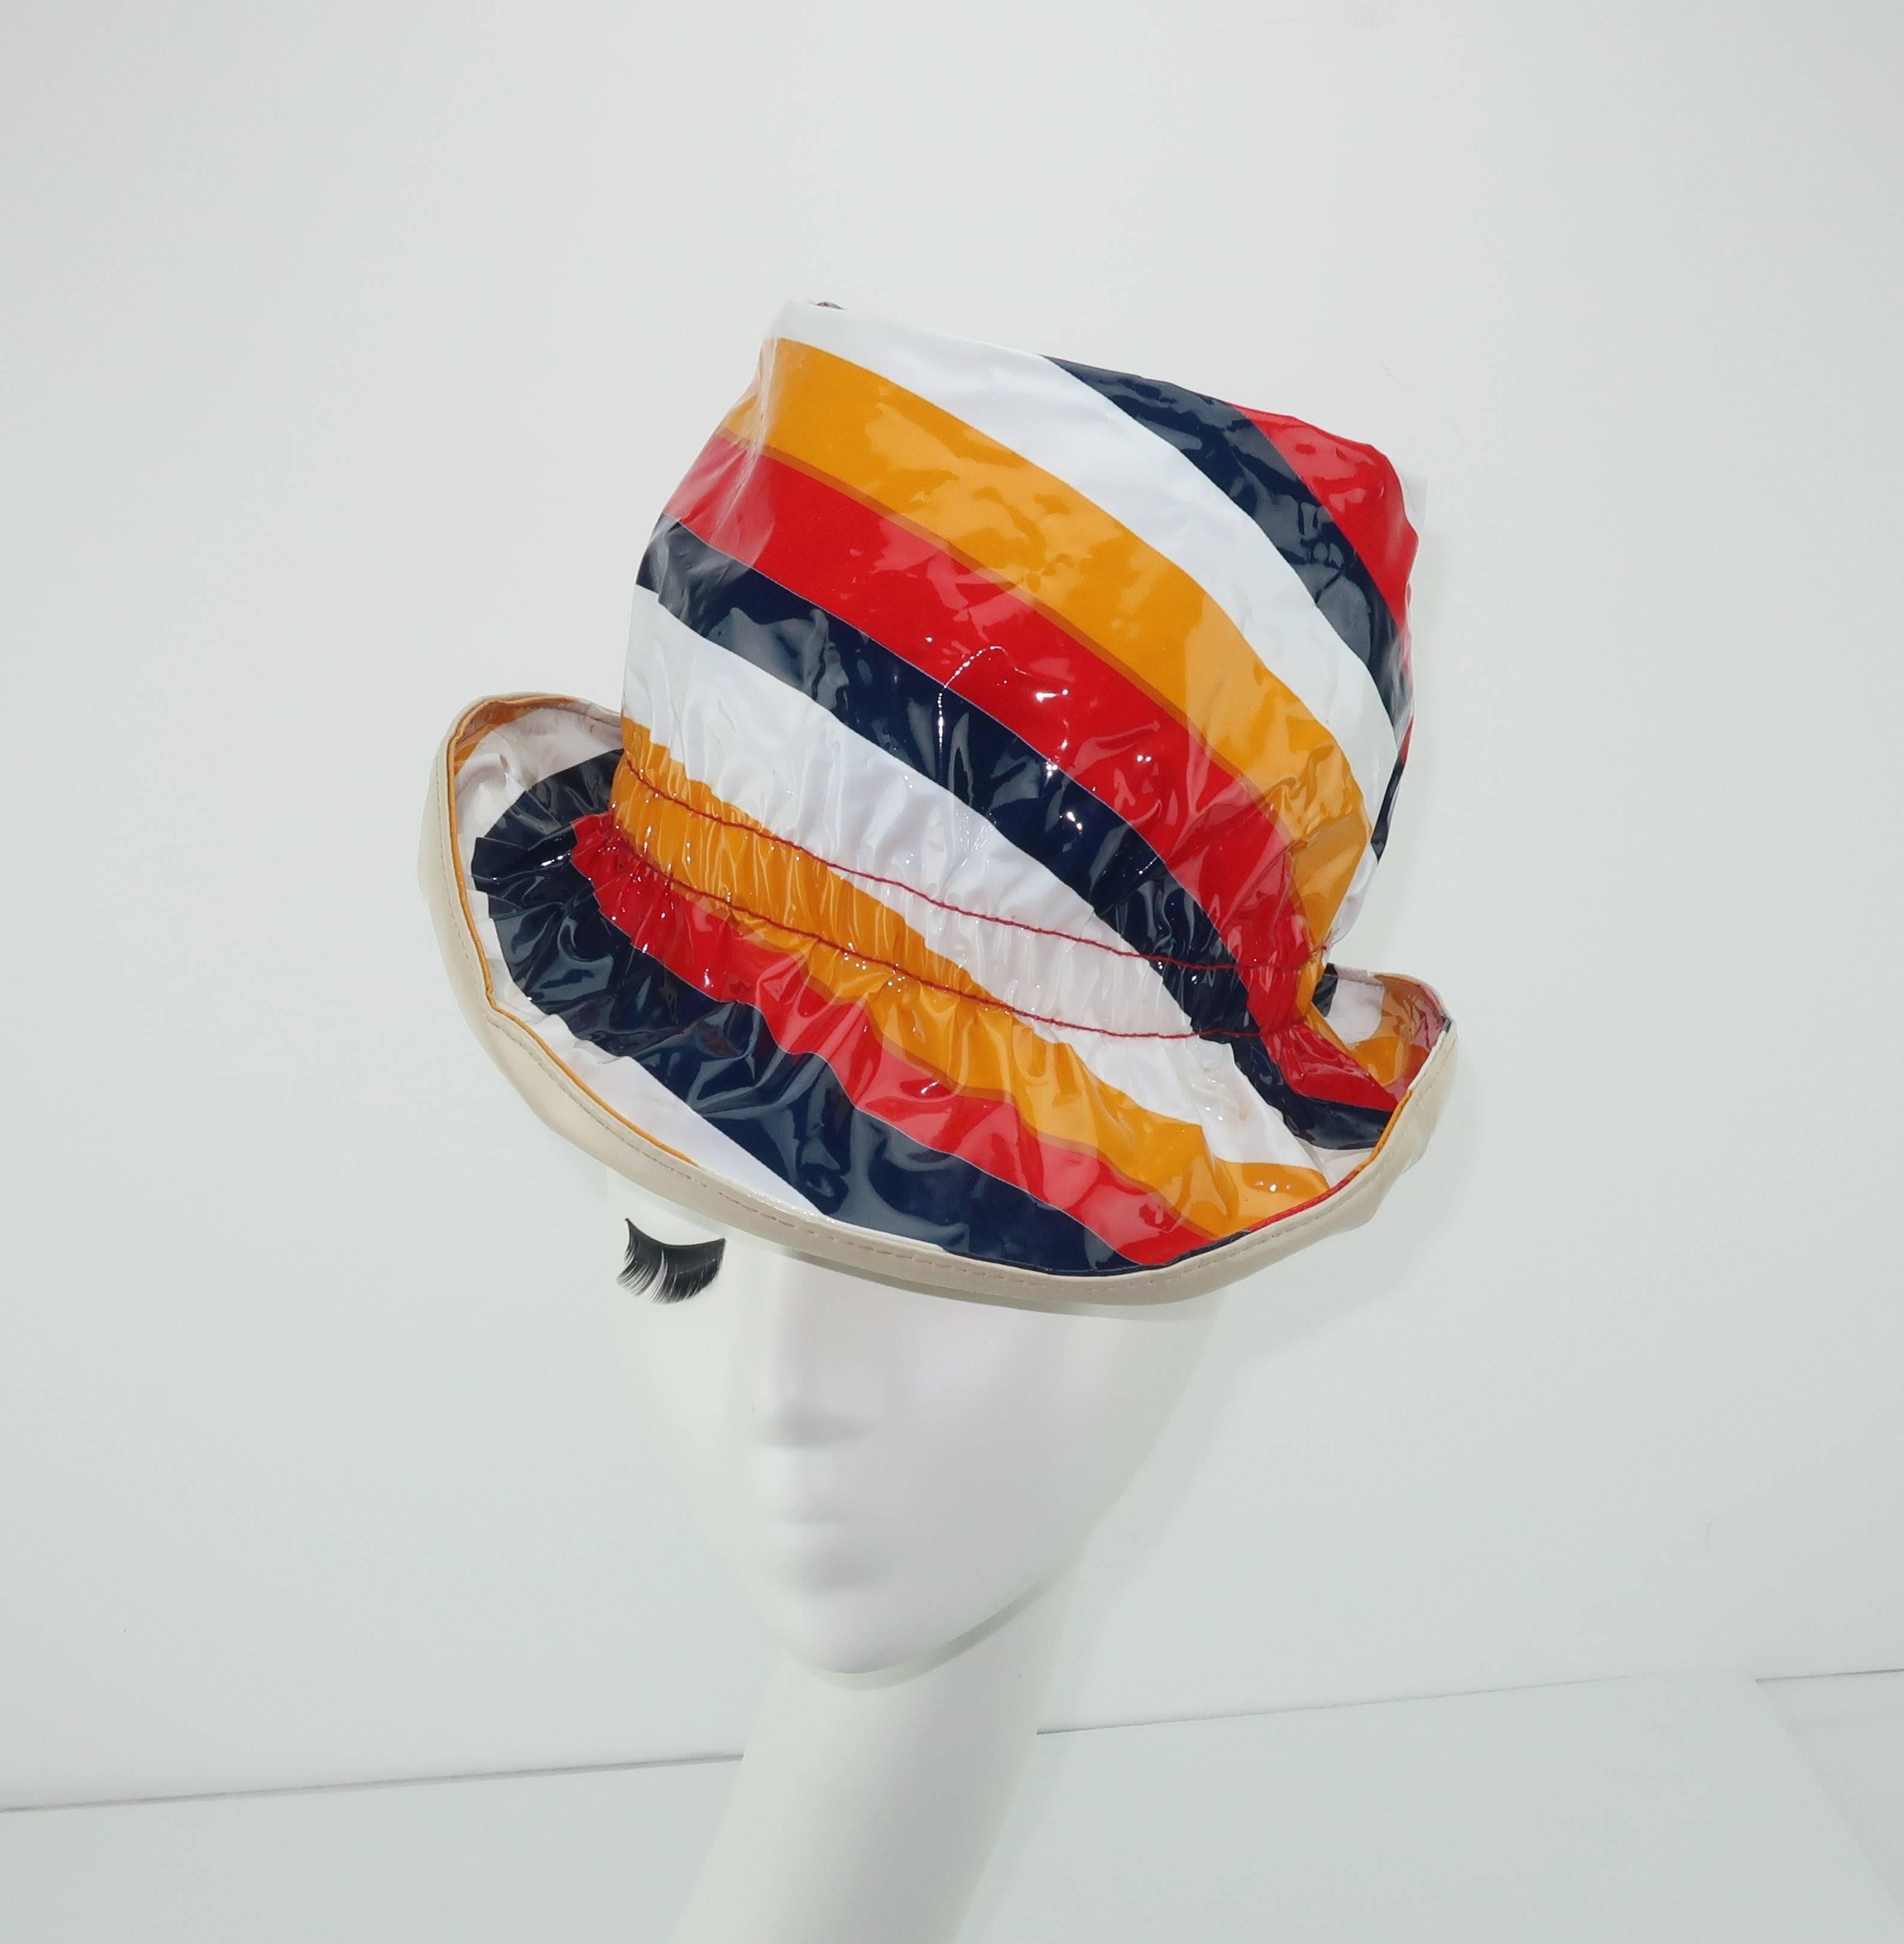 Love it!  This fun plastic hat puts sunshine and a smile into a rainy day.  The pop mod striped hard plastic shell incorporates red, white, blue and yellow colors with a bone shaded vinyl lining.  Practical for an inclement day but it is really just